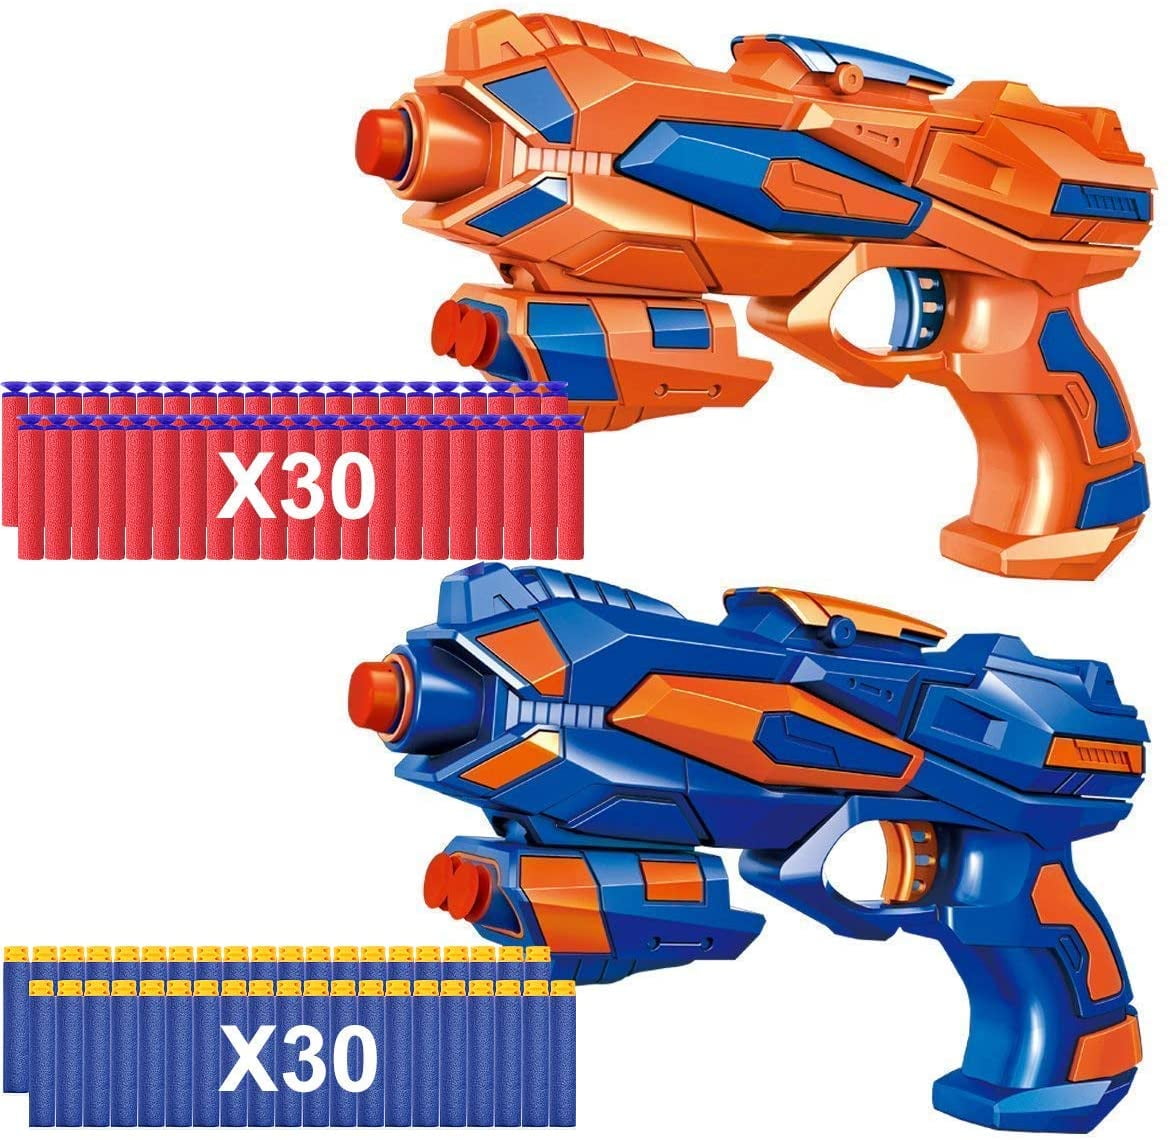 JoyX 2 Pack Blaster Guns Toy Guns for Boys with 60 Pack Refill Soft Foam  Darts for Kids Birthday Gifts Party Supplies Hand Gun Toys for 4 5 6 7 Year  